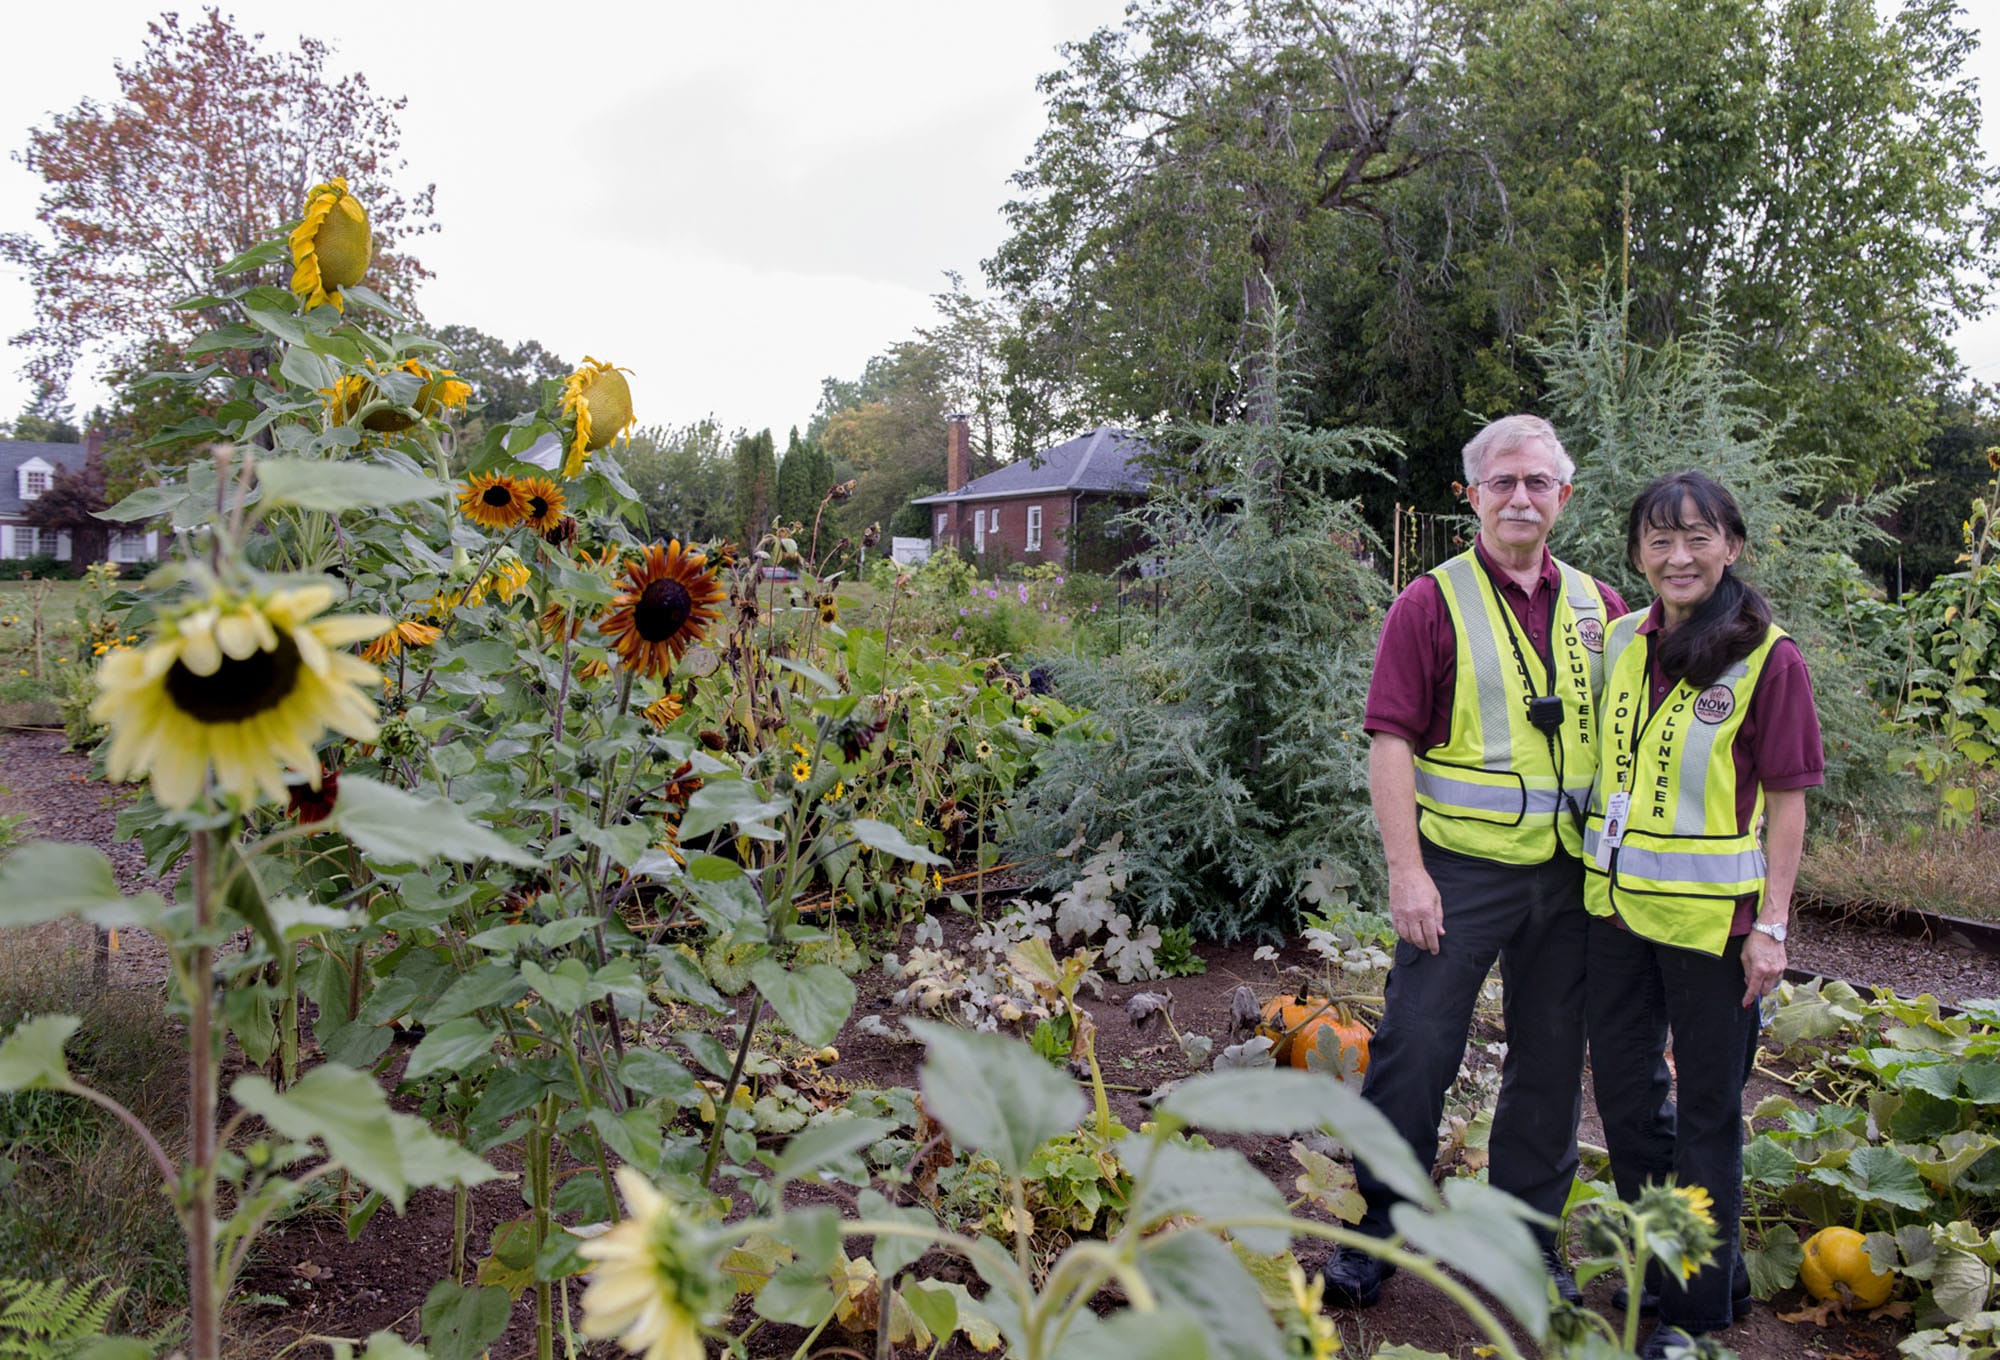 Neighbors On Watch volunteers Andy Chumbley and Ann Glidewell were among the volunteers who have stepped up patrols around the Arnada Community Garden in Vancouver to help deter criminal activity.